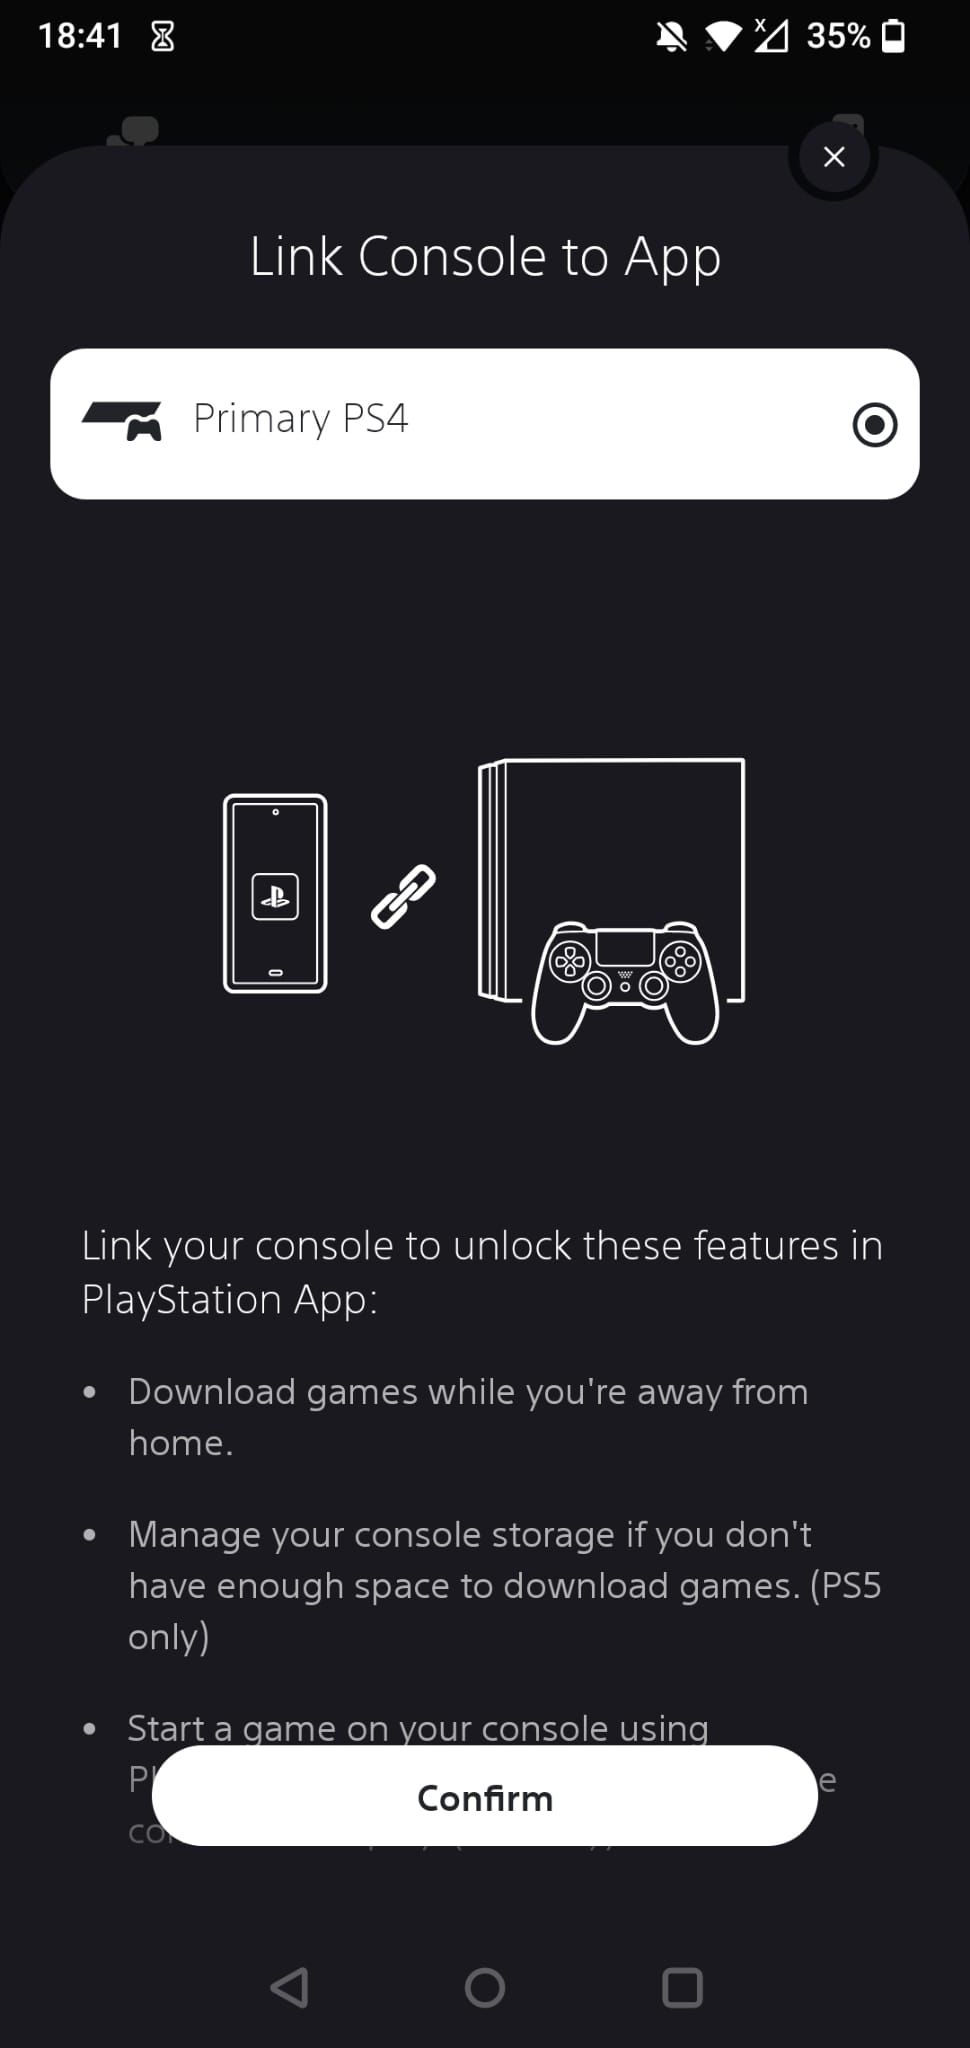 The Link Console to App section on the PS App on Android